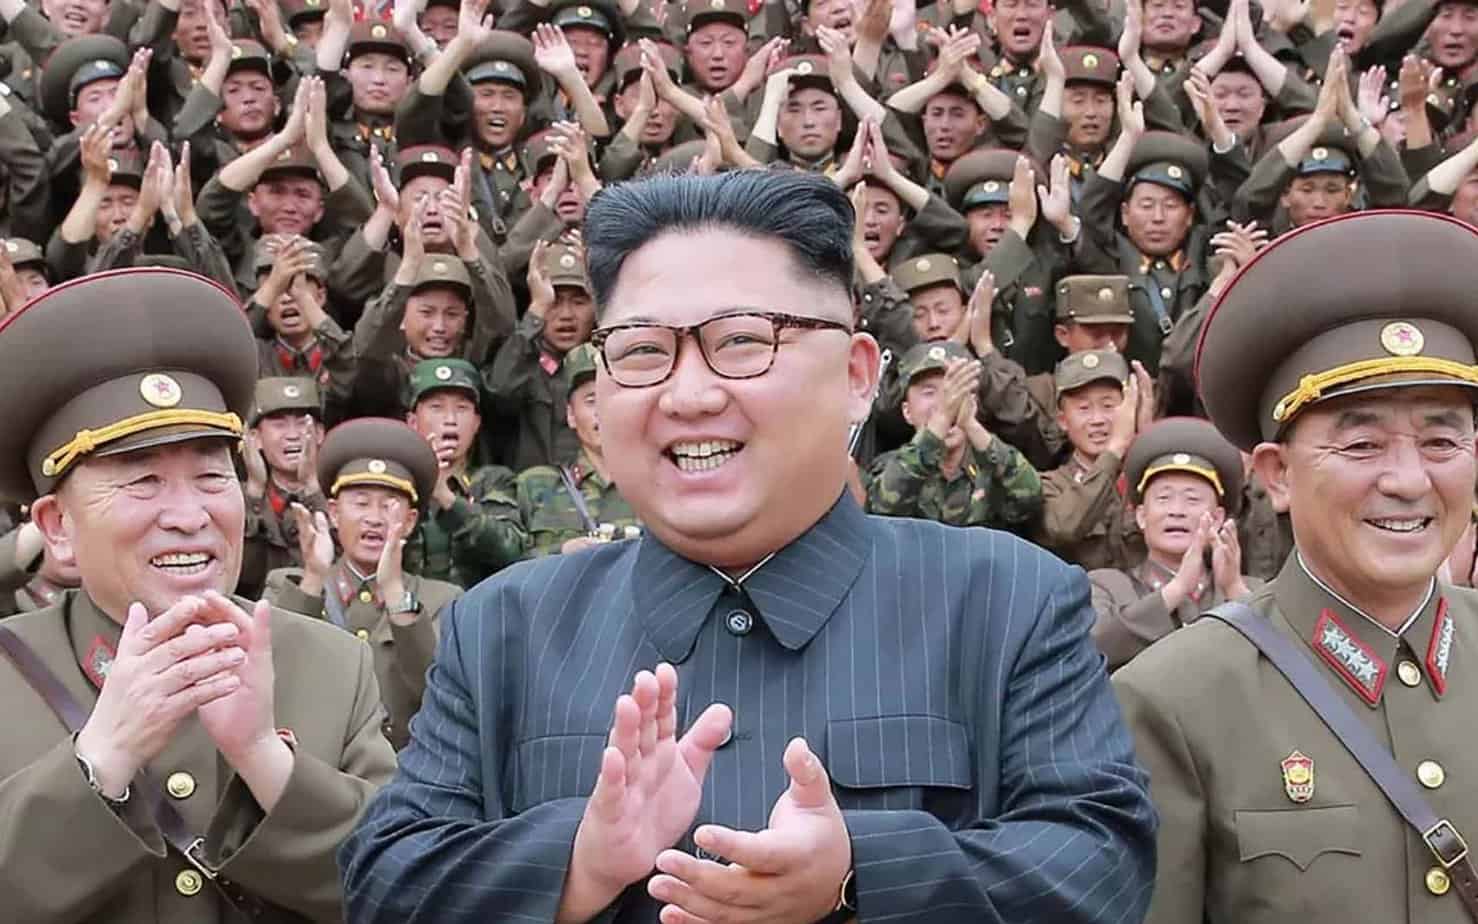 Kim Jong Un Rumors - Leader of North Korea's fate is up in the air